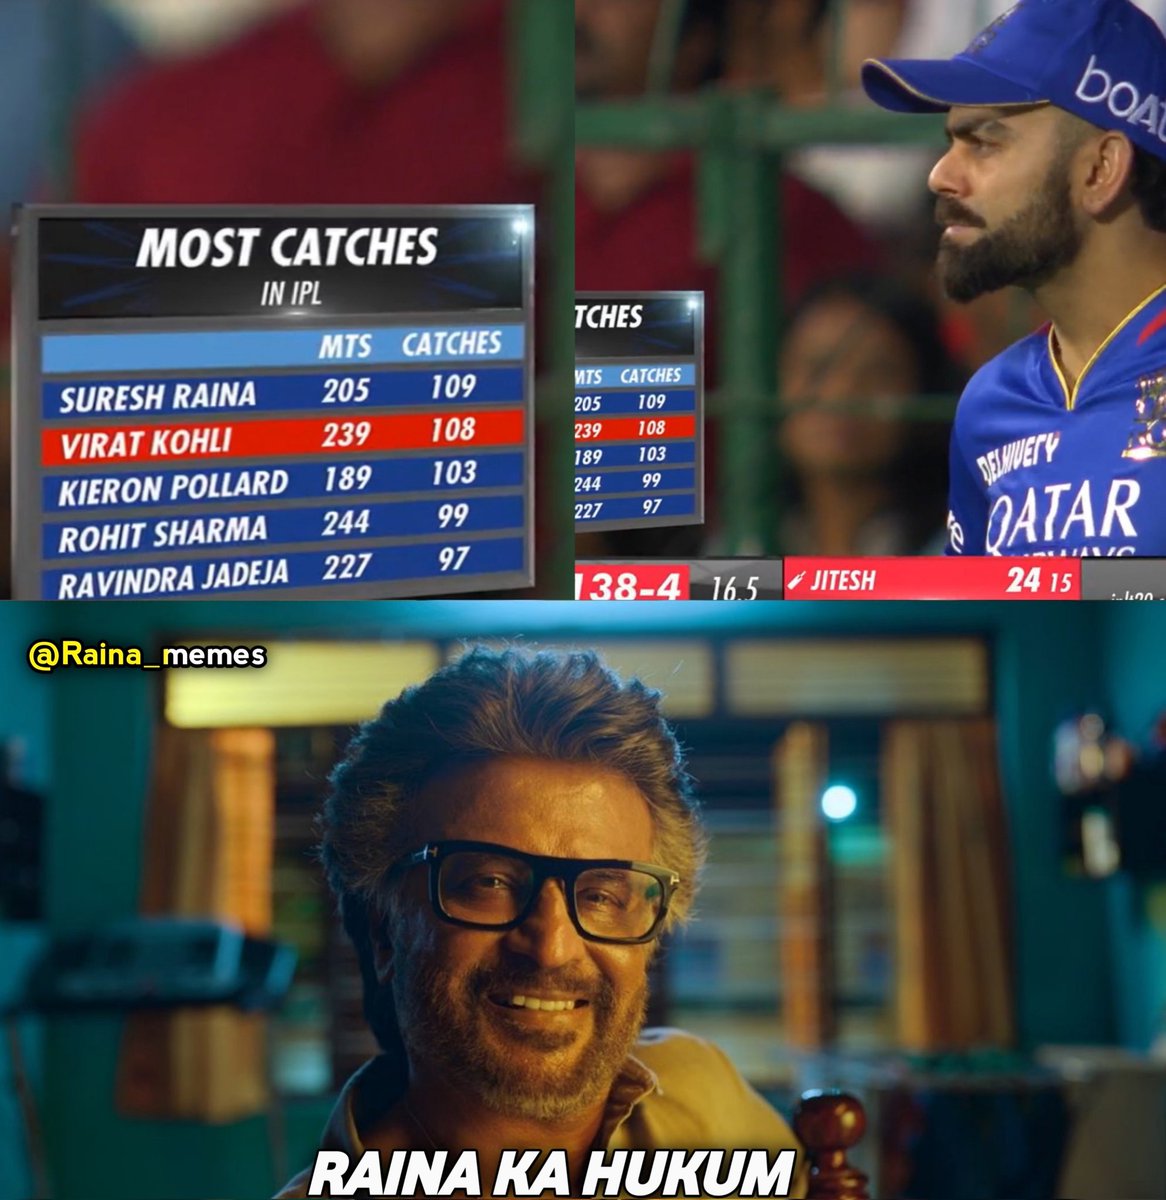 Suresh Raina didn't played 3 seasons and he is still on top 🔥🔥